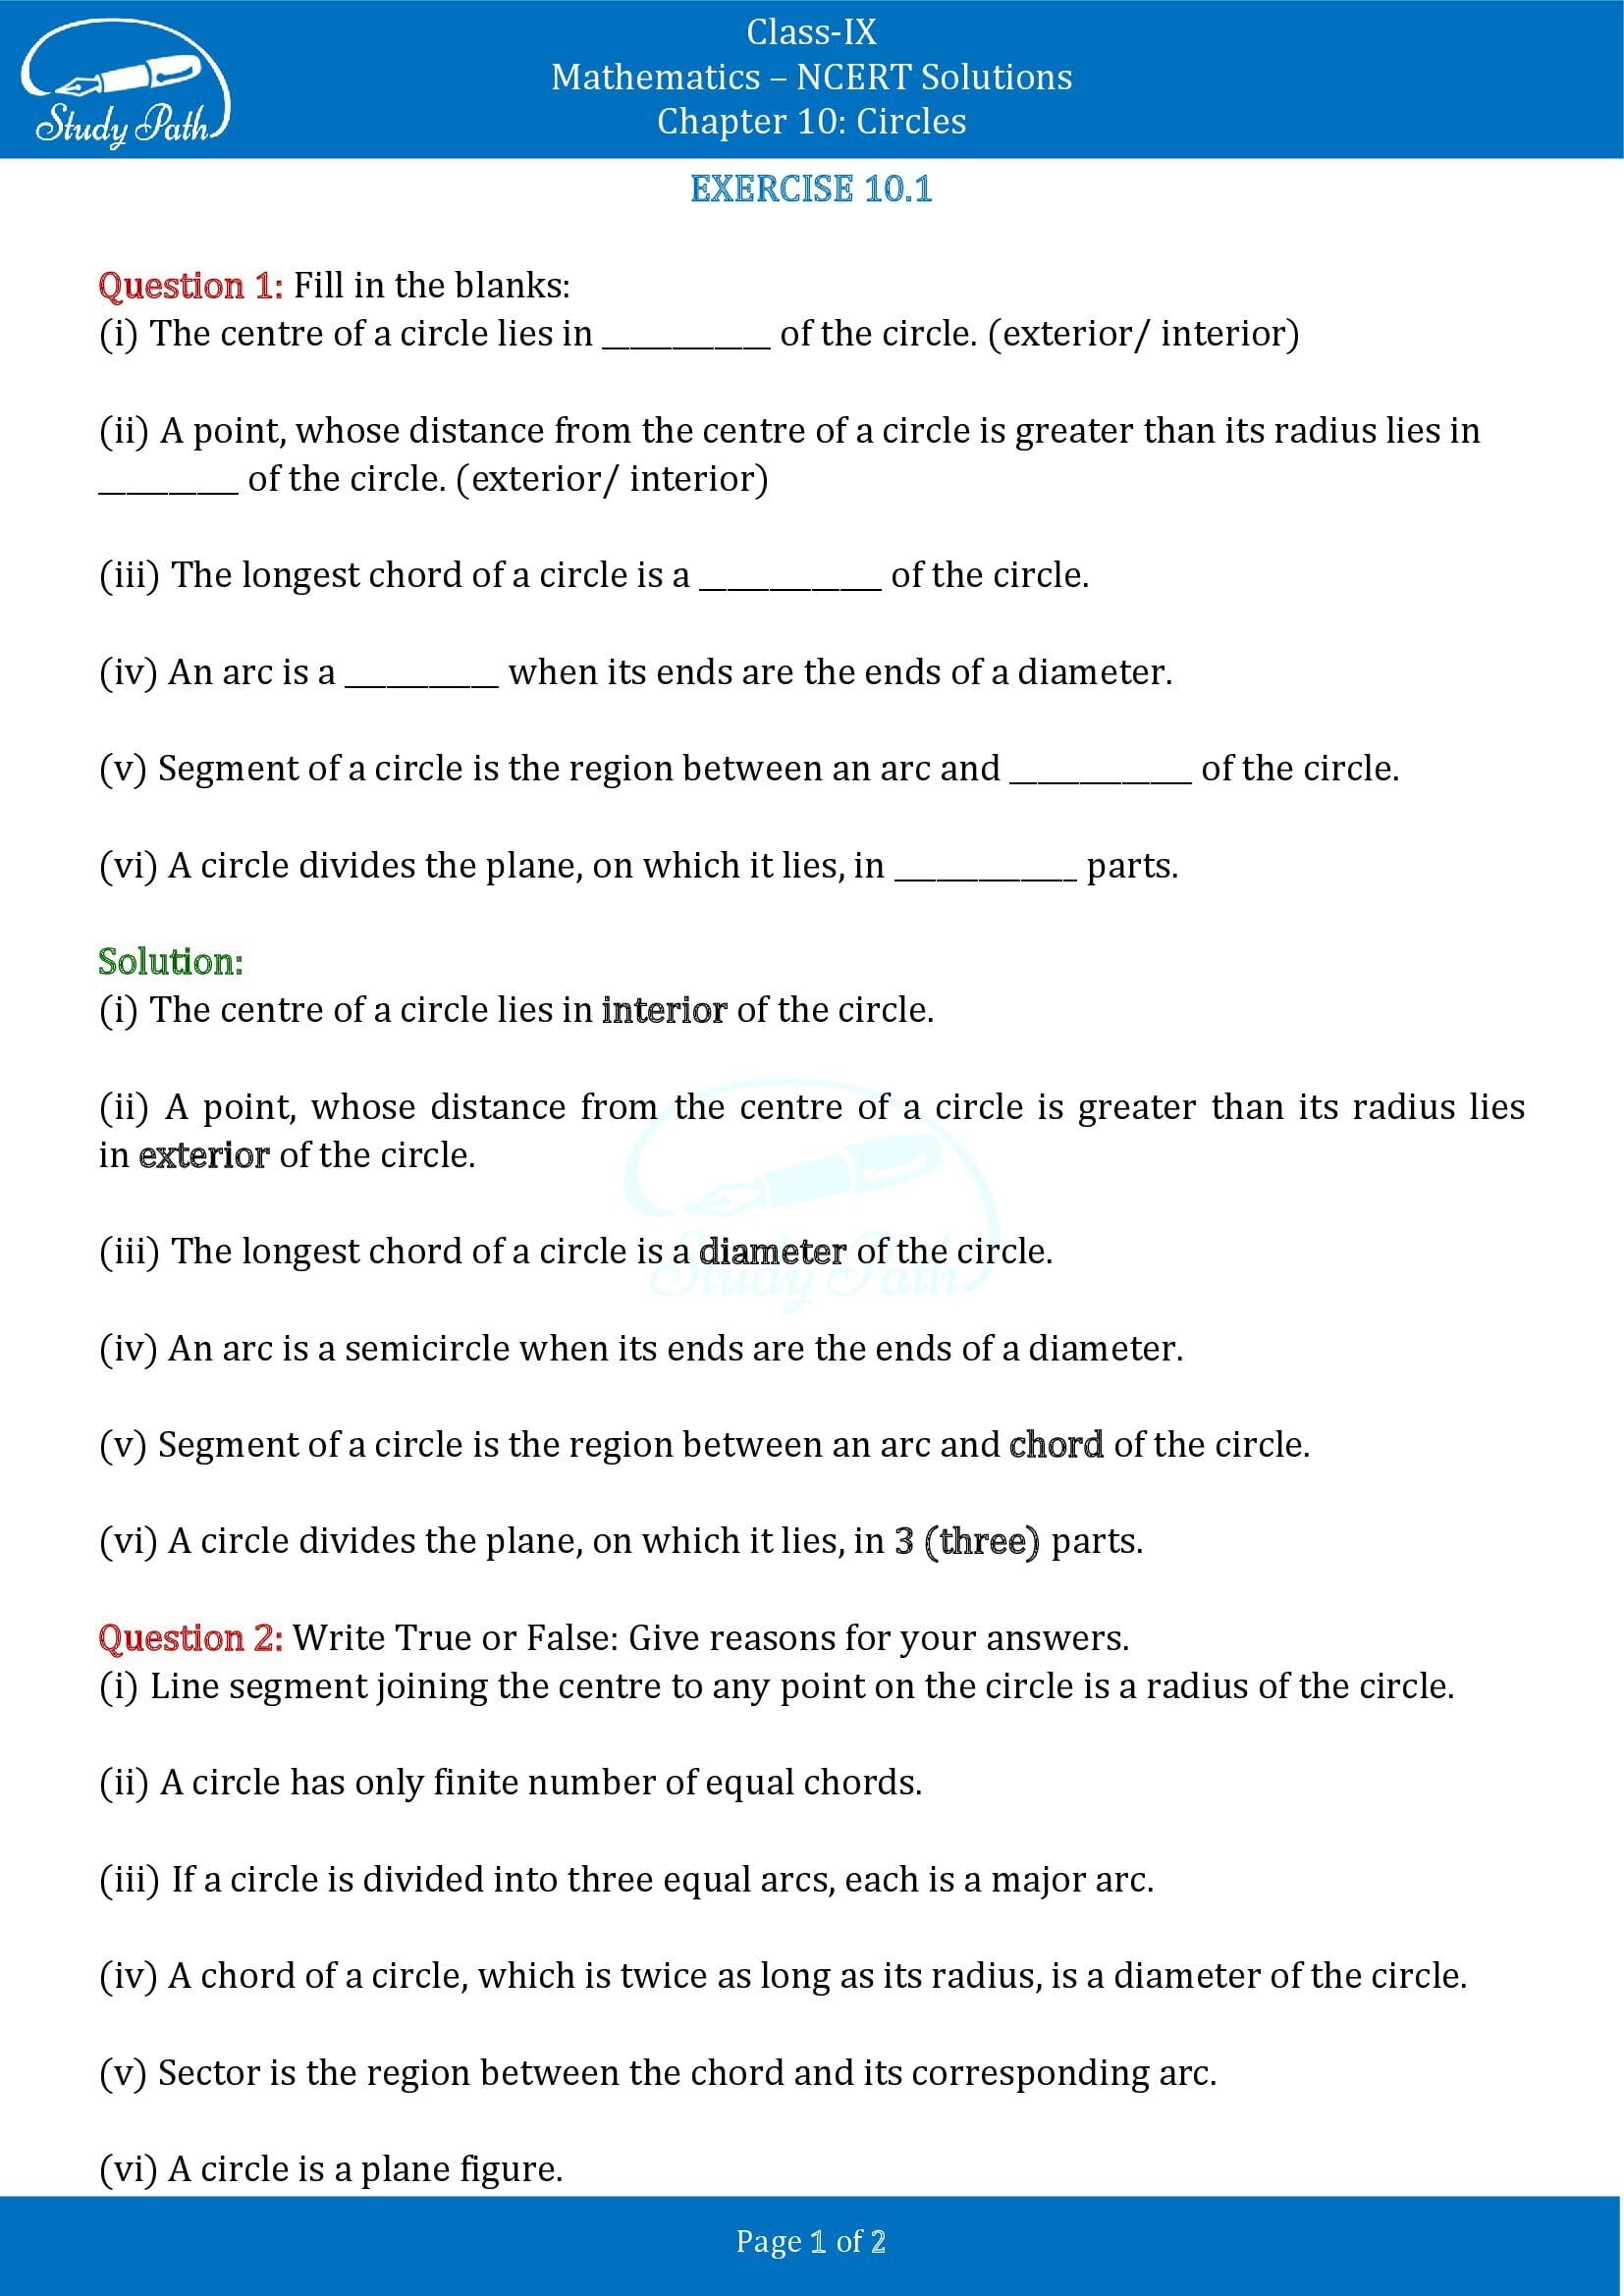 NCERT Solutions for Class 9 Maths Chapter 10 Circles Exercise 10.1 00001